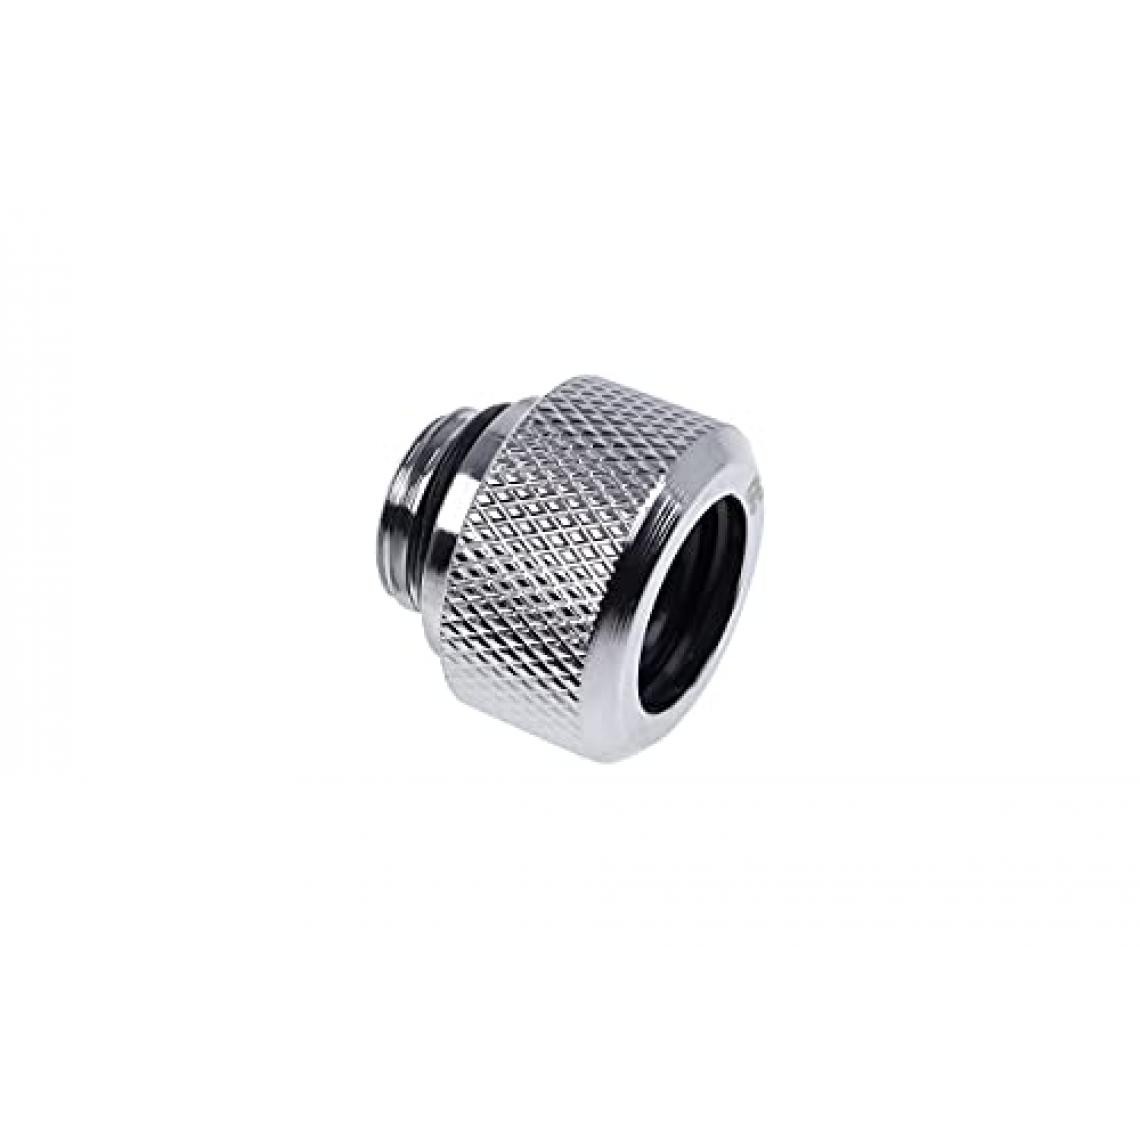 Alphacool - Raccord pour Tube Ø13mm - G1/4 Eiszapfen (Argent) - Kit watercooling